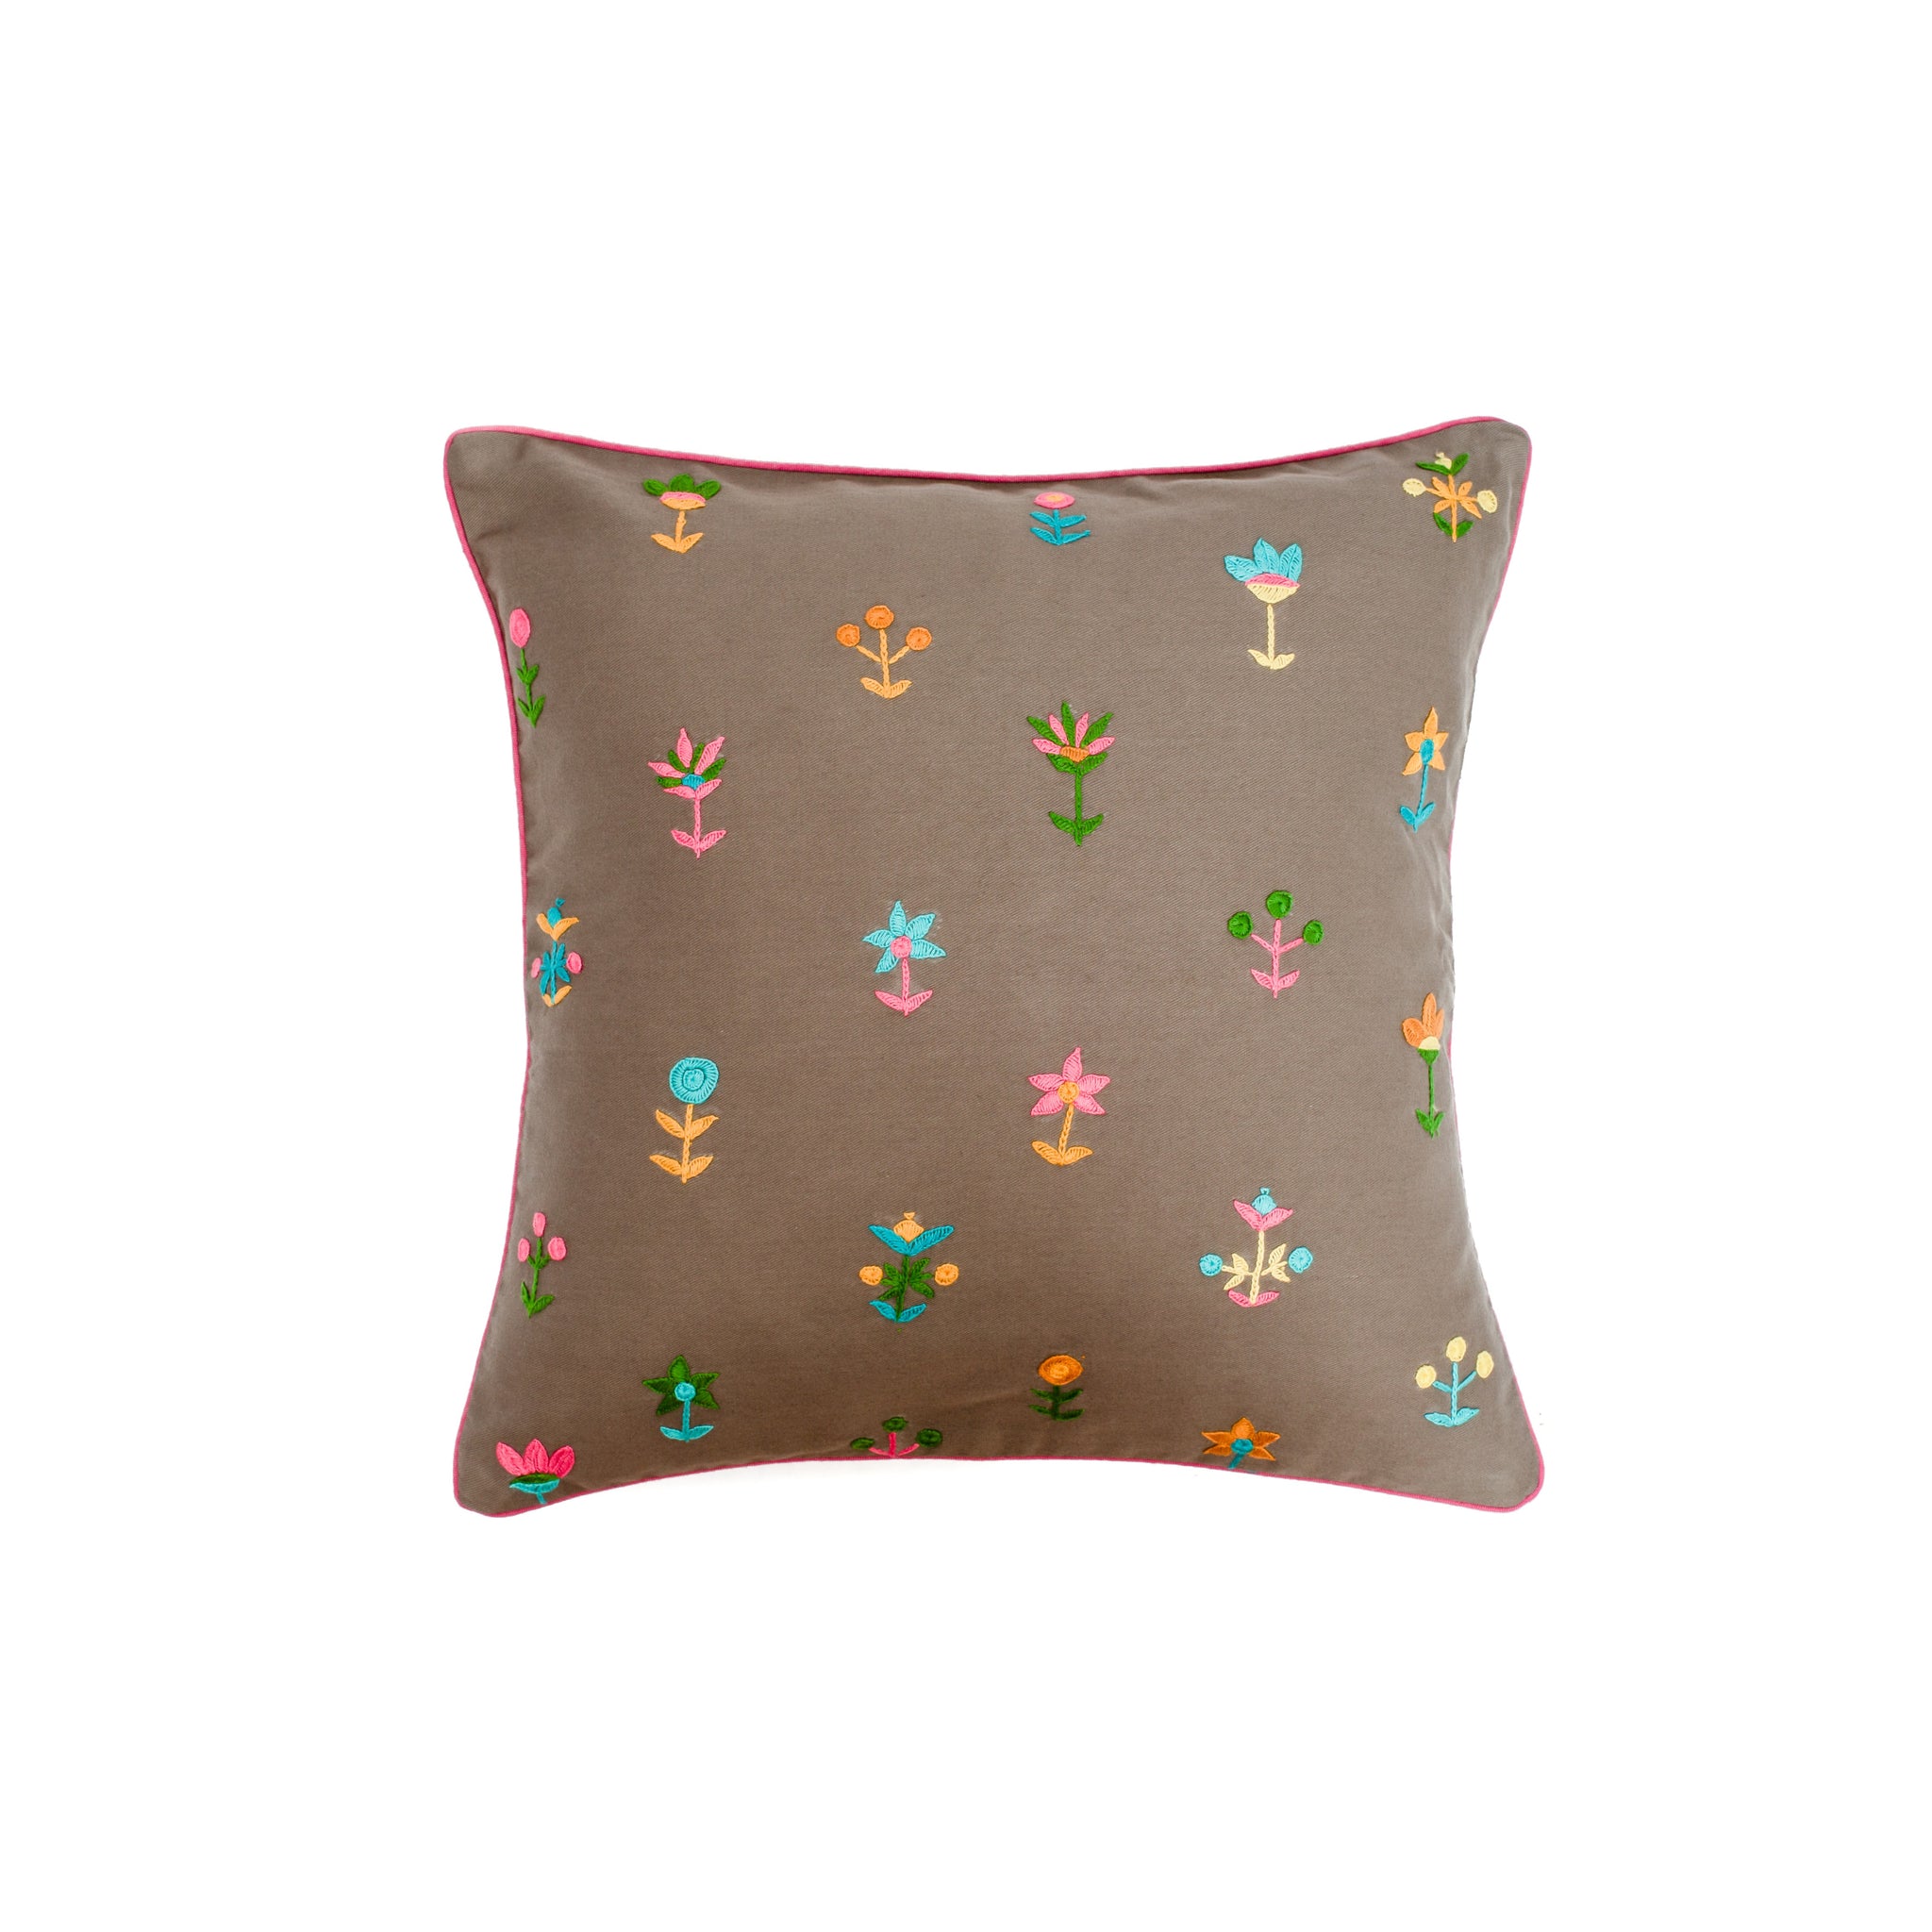 Grey Cotton  Cushion Cover with Colourful Floral Motif